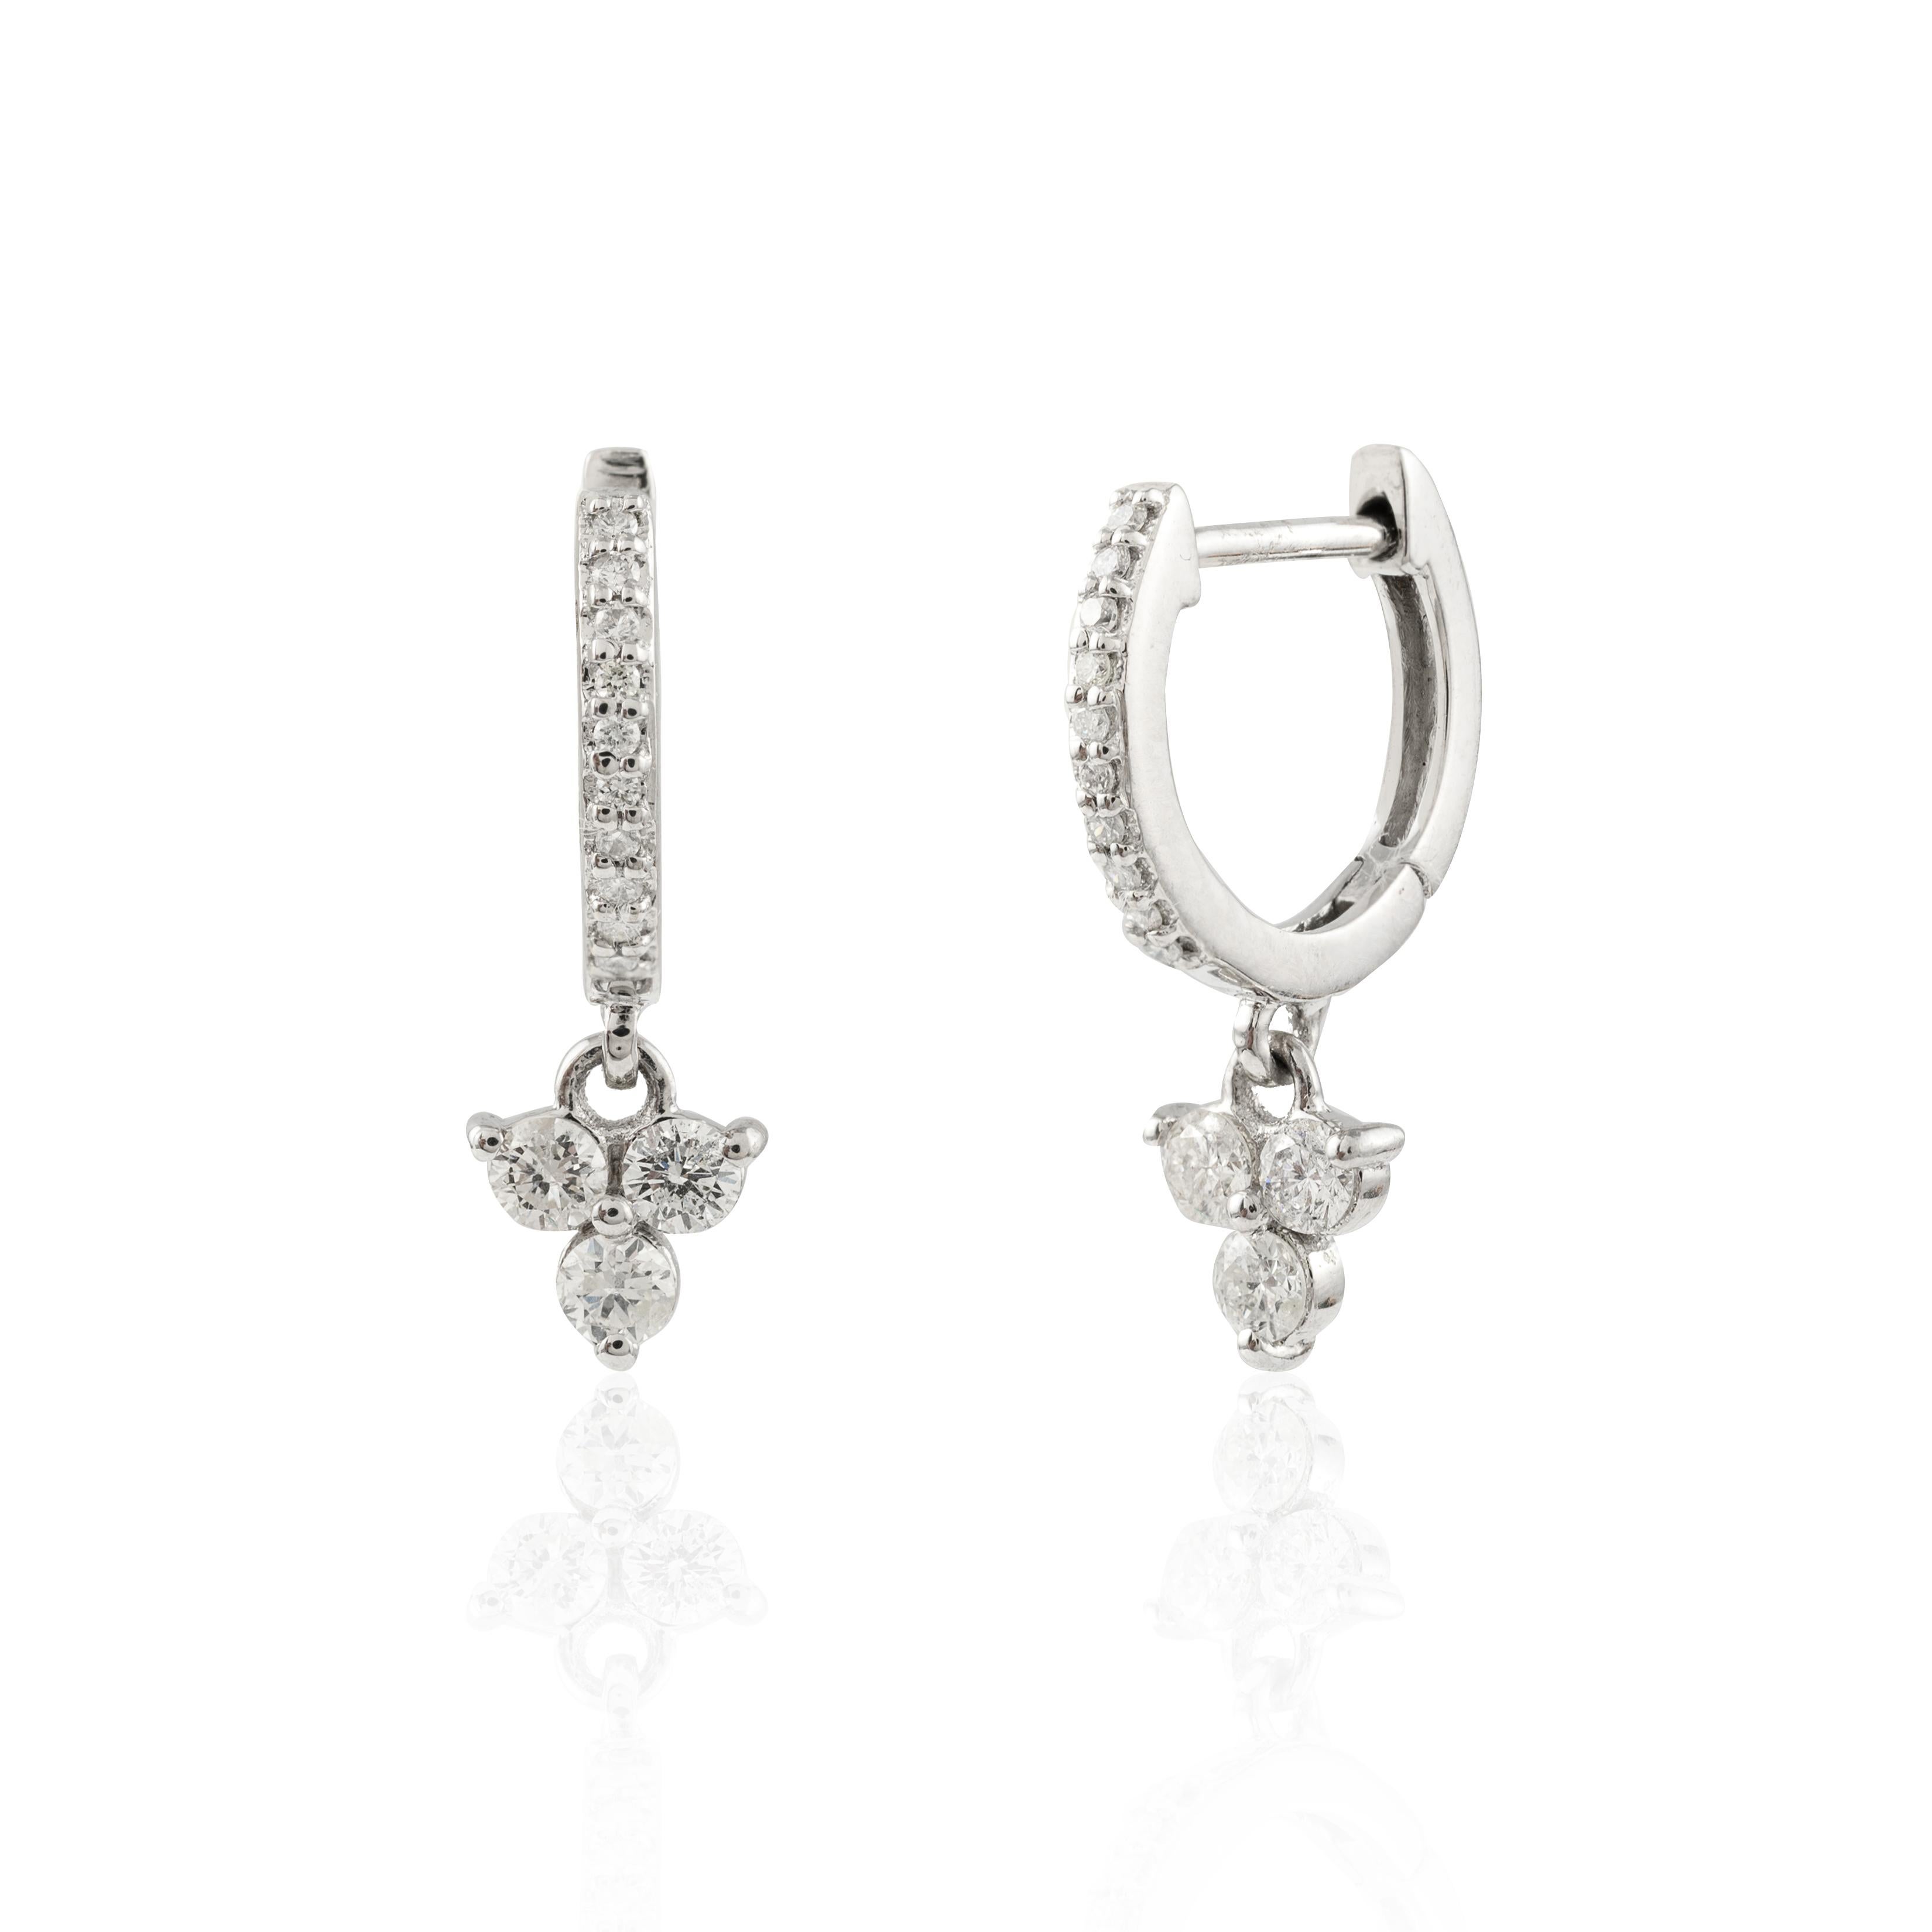 Dainty Huggie Diamond Drop Earrings For Her in 18K Gold to make a statement with your look. You shall need these earrings to make a statement with your look. These earrings create a sparkling, luxurious look featuring round cut diamonds.
April